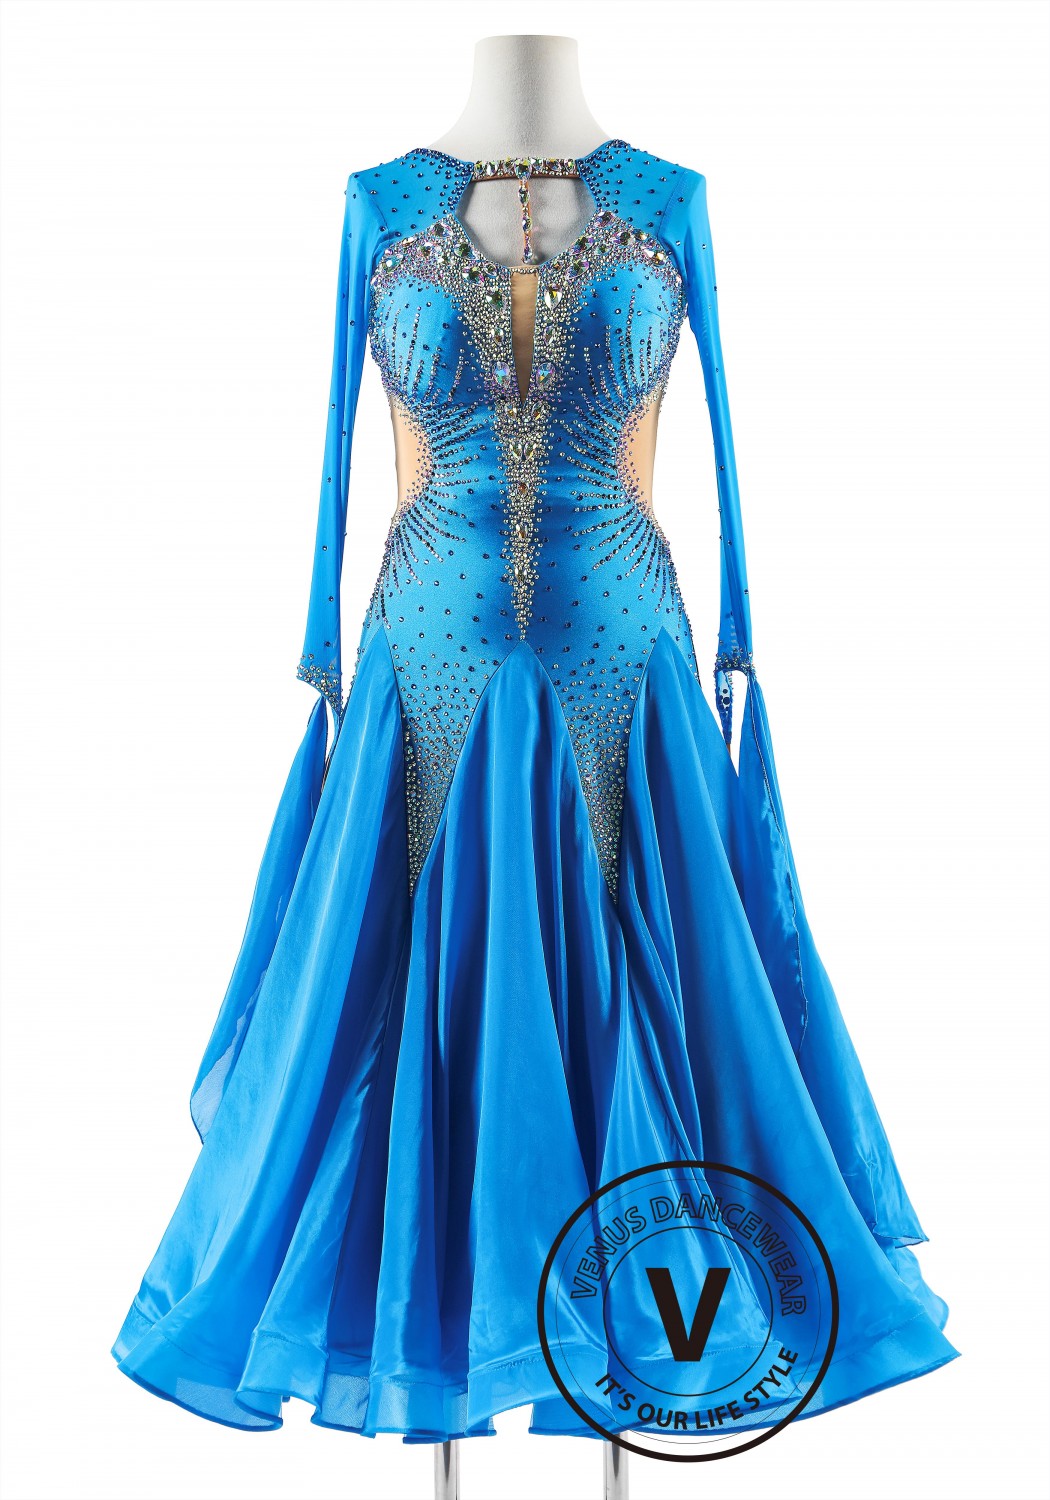 Sparkling Azure Dress with Pearl Silk Skirt Ballroom Smooth Competition Dance Dress